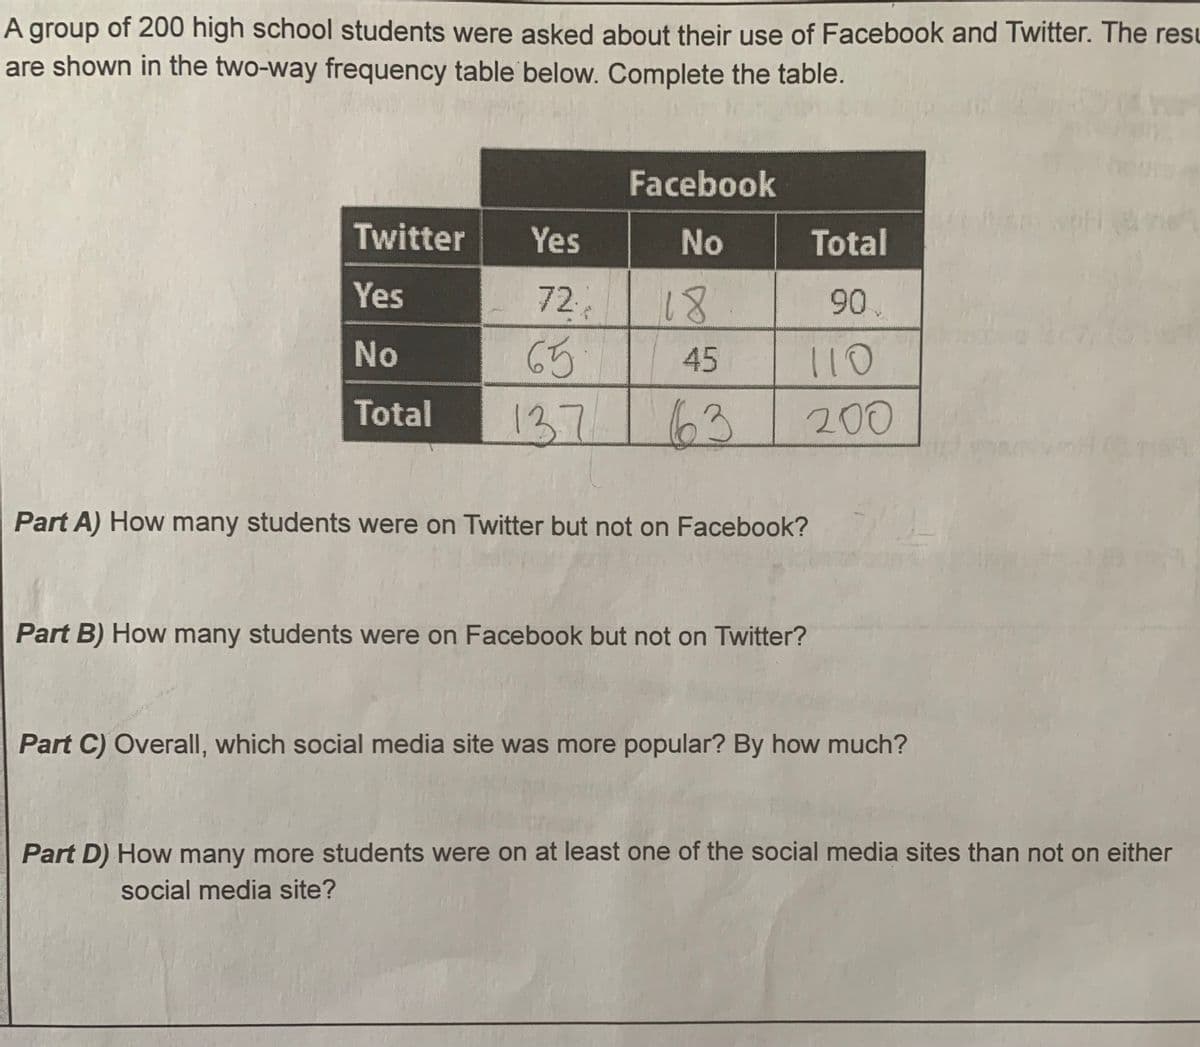 A group of 200 high school students were asked about their use of Facebook and Twitter. The resu
are shown in the two-way frequency table below. Complete the table.
Facebook
Twitter
Yes
No
Total
Yes
90
No
65
45
110
Total
137 63
200
Part A) How many students were on Twitter but not on Facebook?
Part B) How many students were on Facebook but not on Twitter?
Part C) Overall, which social media site was more popular? By how much?
Part D) How many more students were on at least one of the social media sites than not on either
social media site?
72,
18